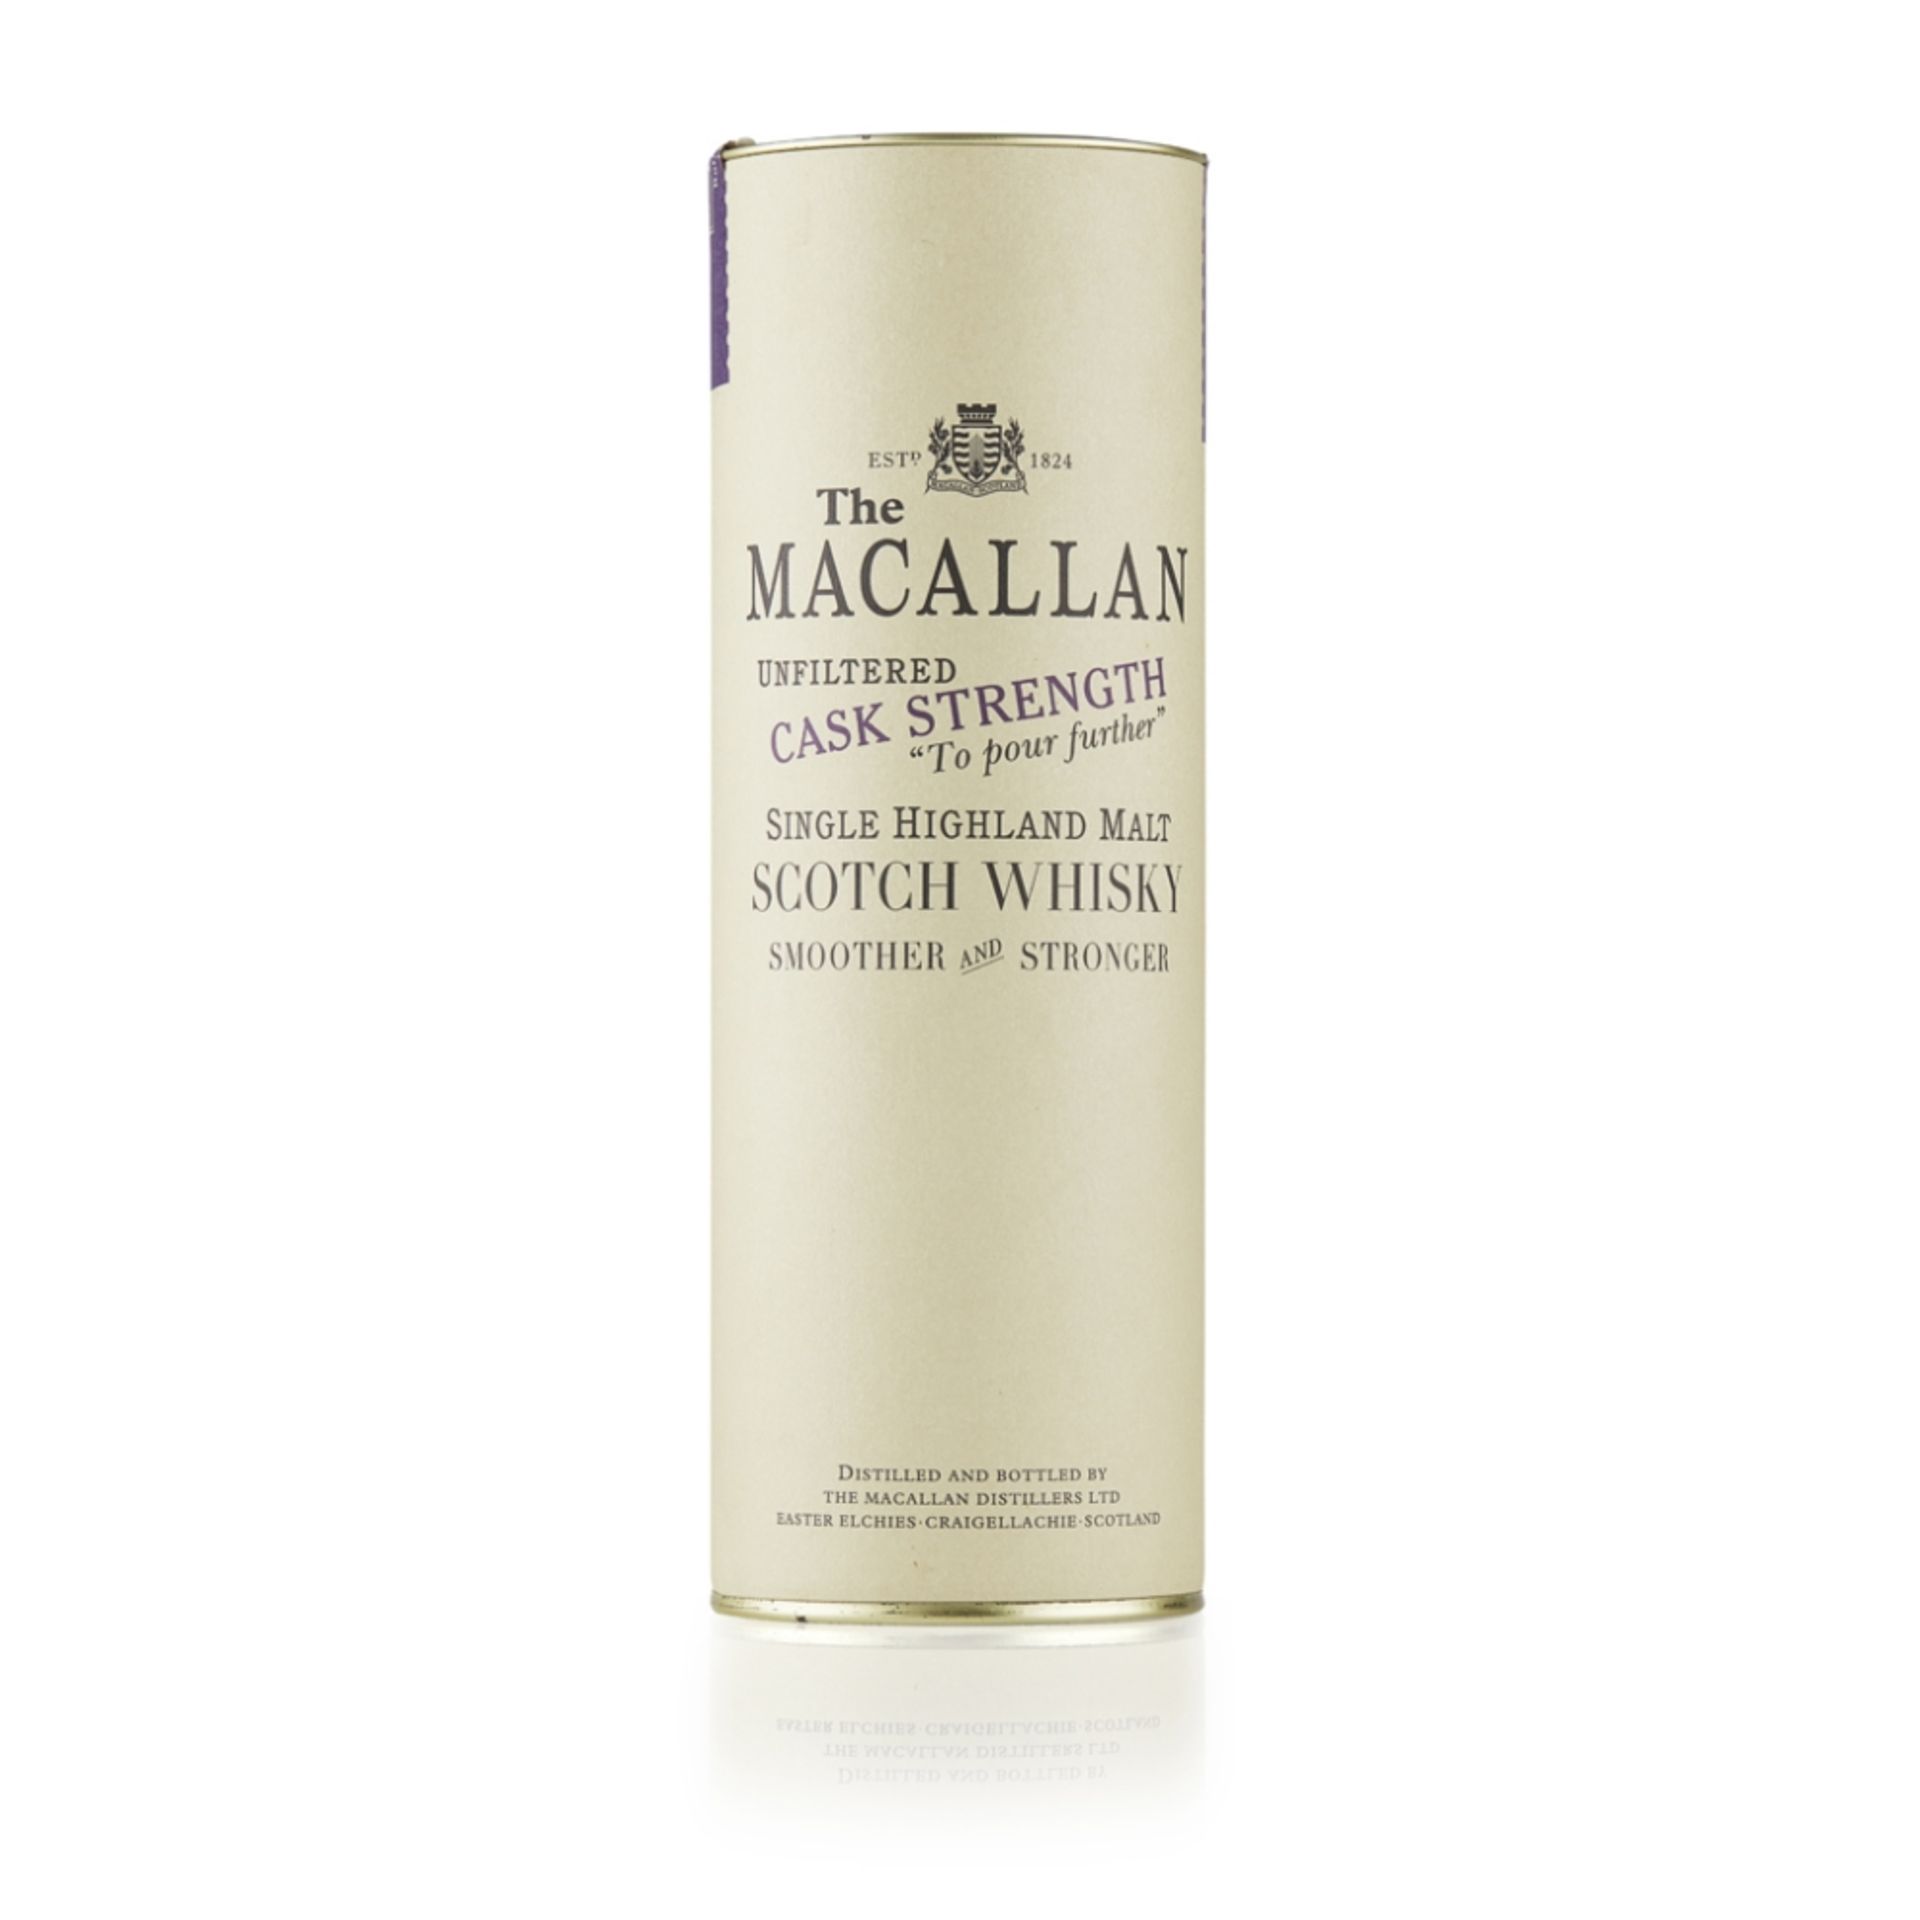 THE MACALLAN 1980 CASK STRENGTH matured in an Olorosso sherry butt, cask number 4063, with carton